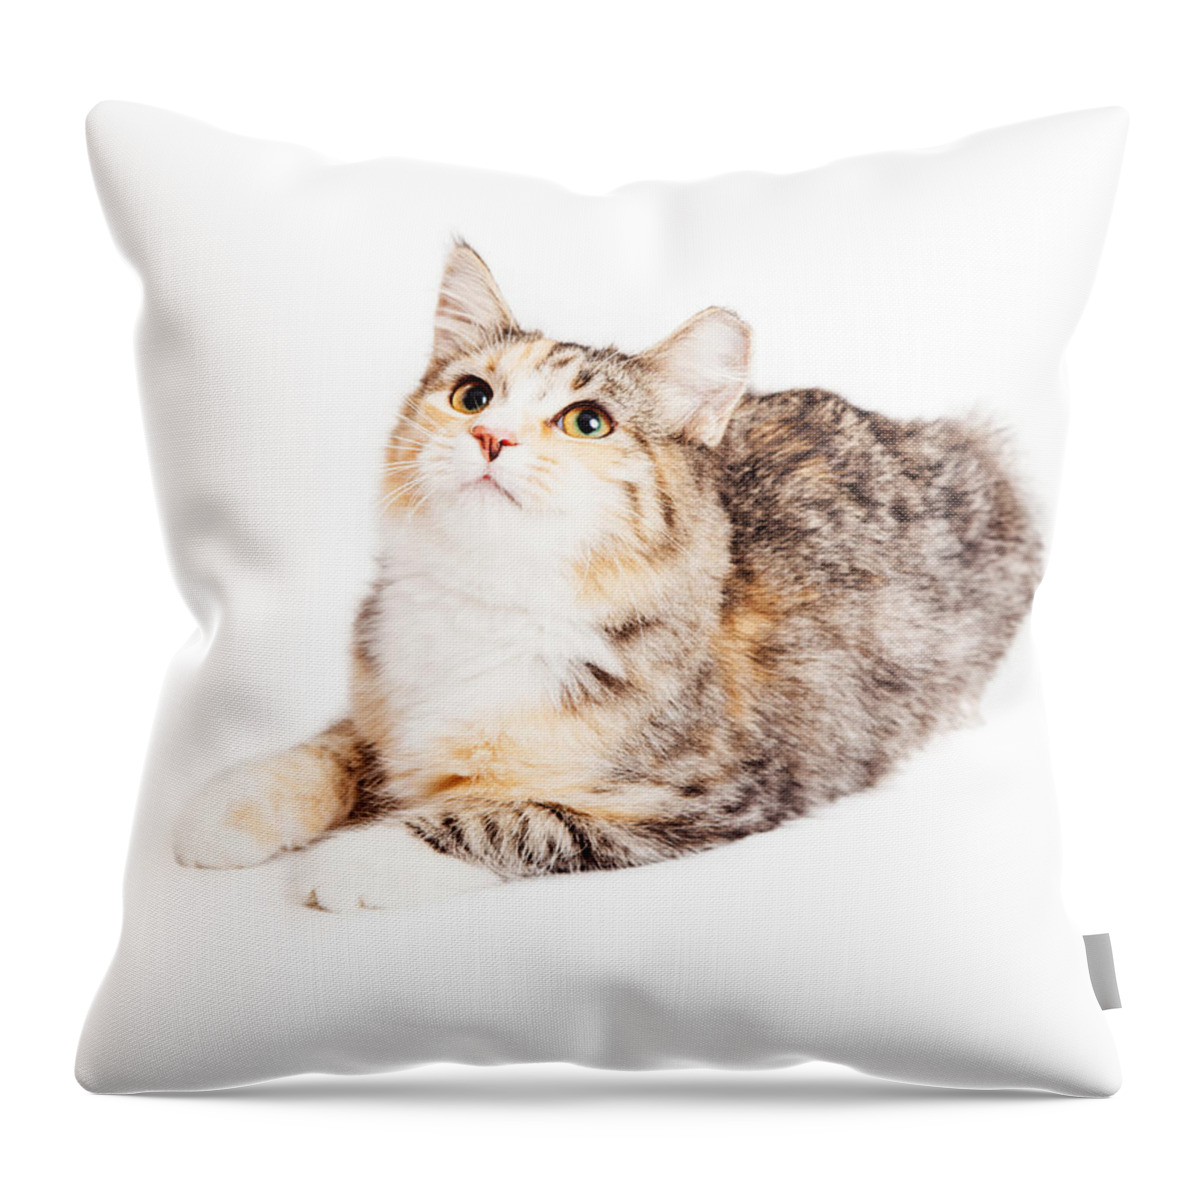 Adorable Throw Pillow featuring the photograph Adorable Calico Kitty Looking Up by Good Focused